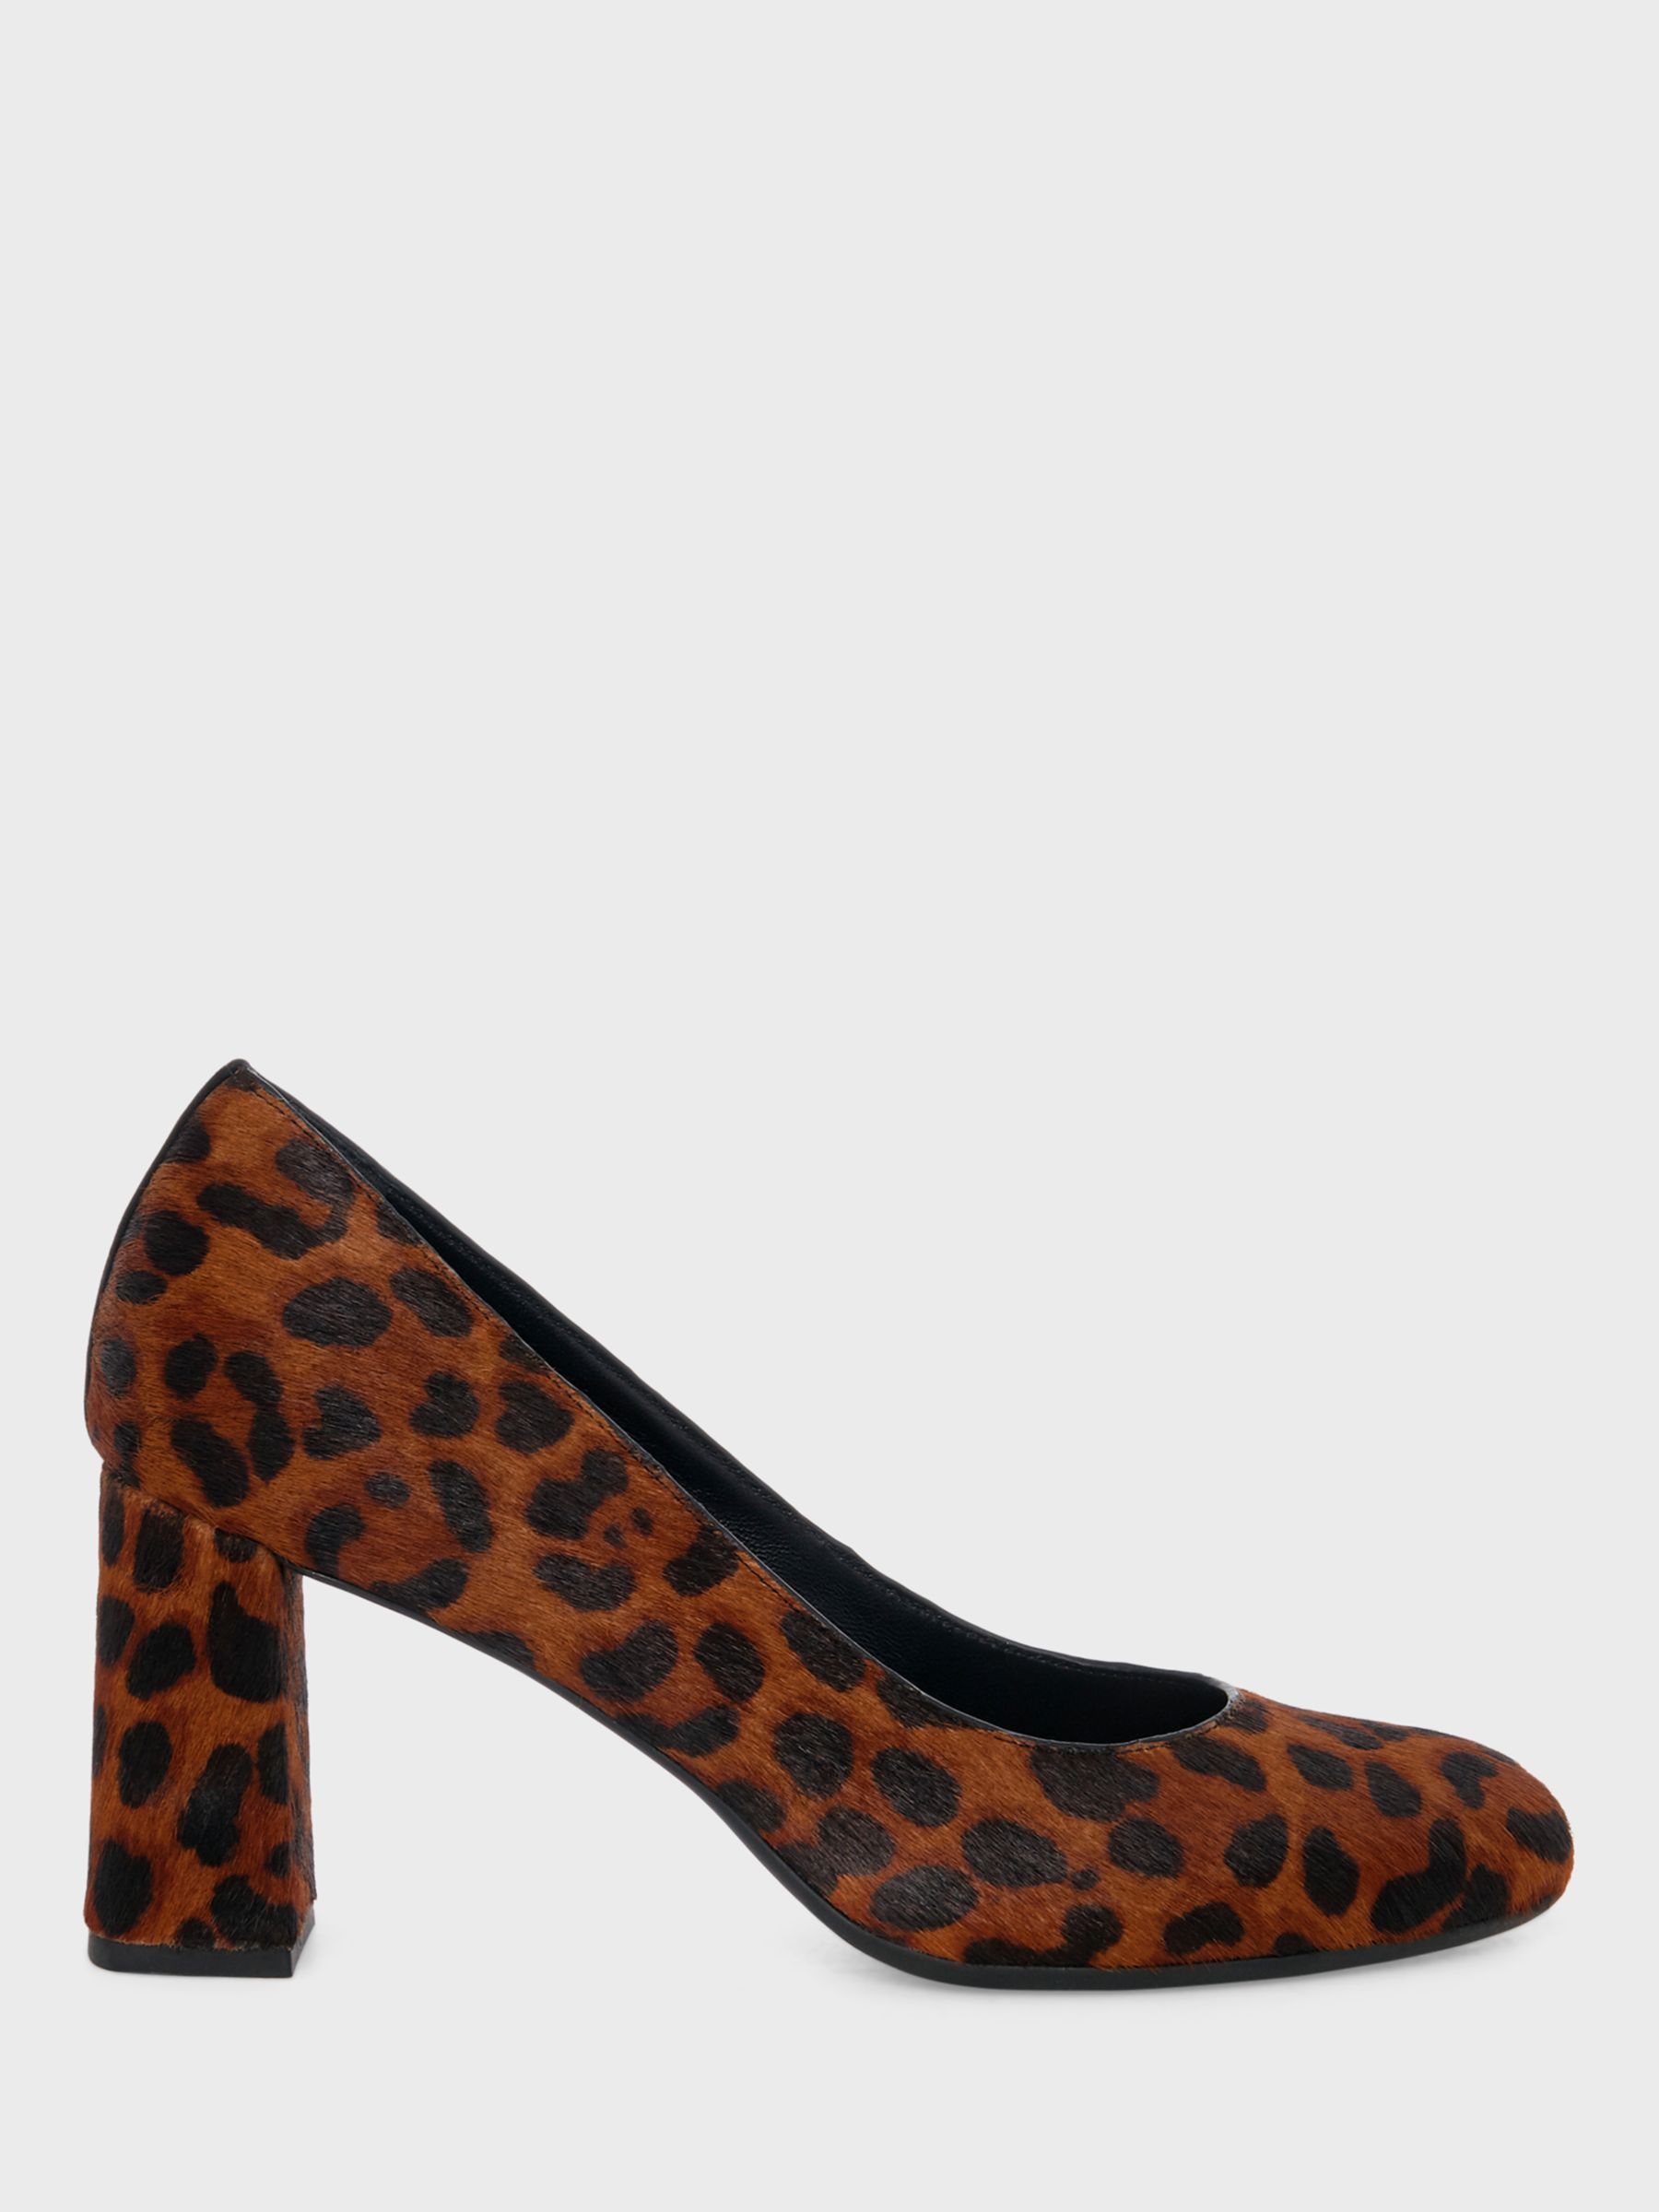 Hobbs Sonia Leopard Leather Court Shoes, Brown, 4